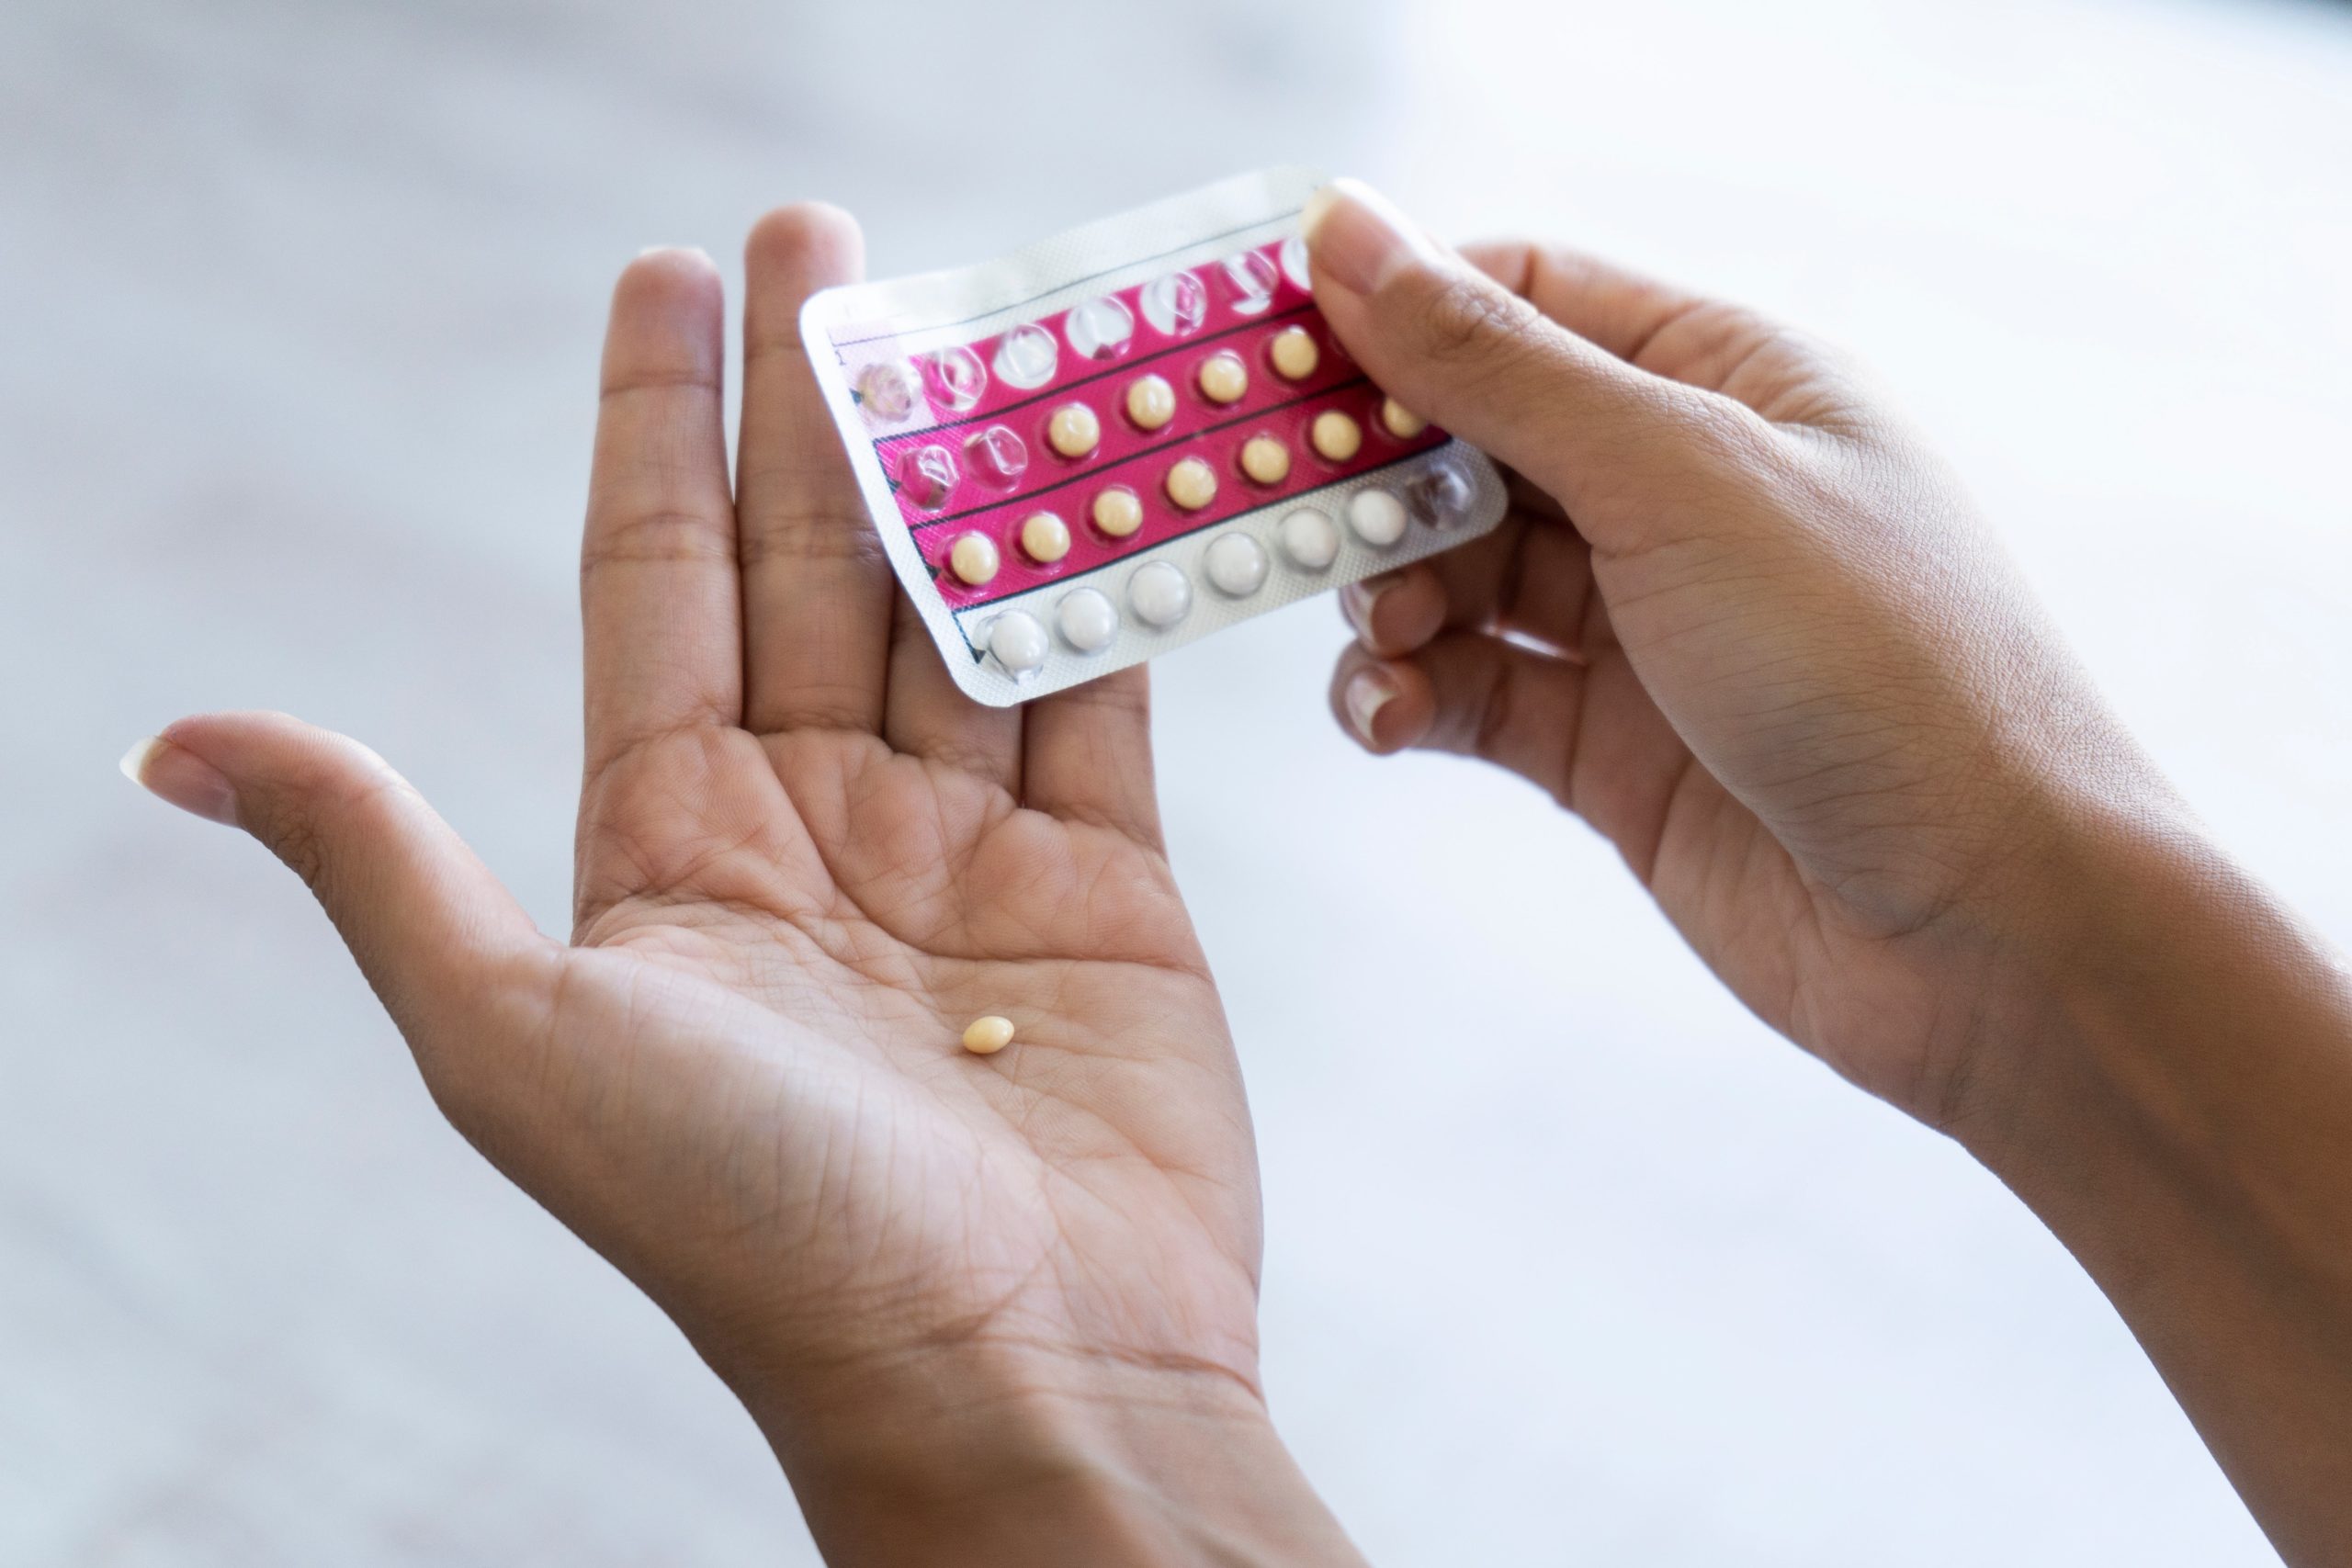 Birth Control Pills Are Safe and Simple: Why Do They Require a Prescription?